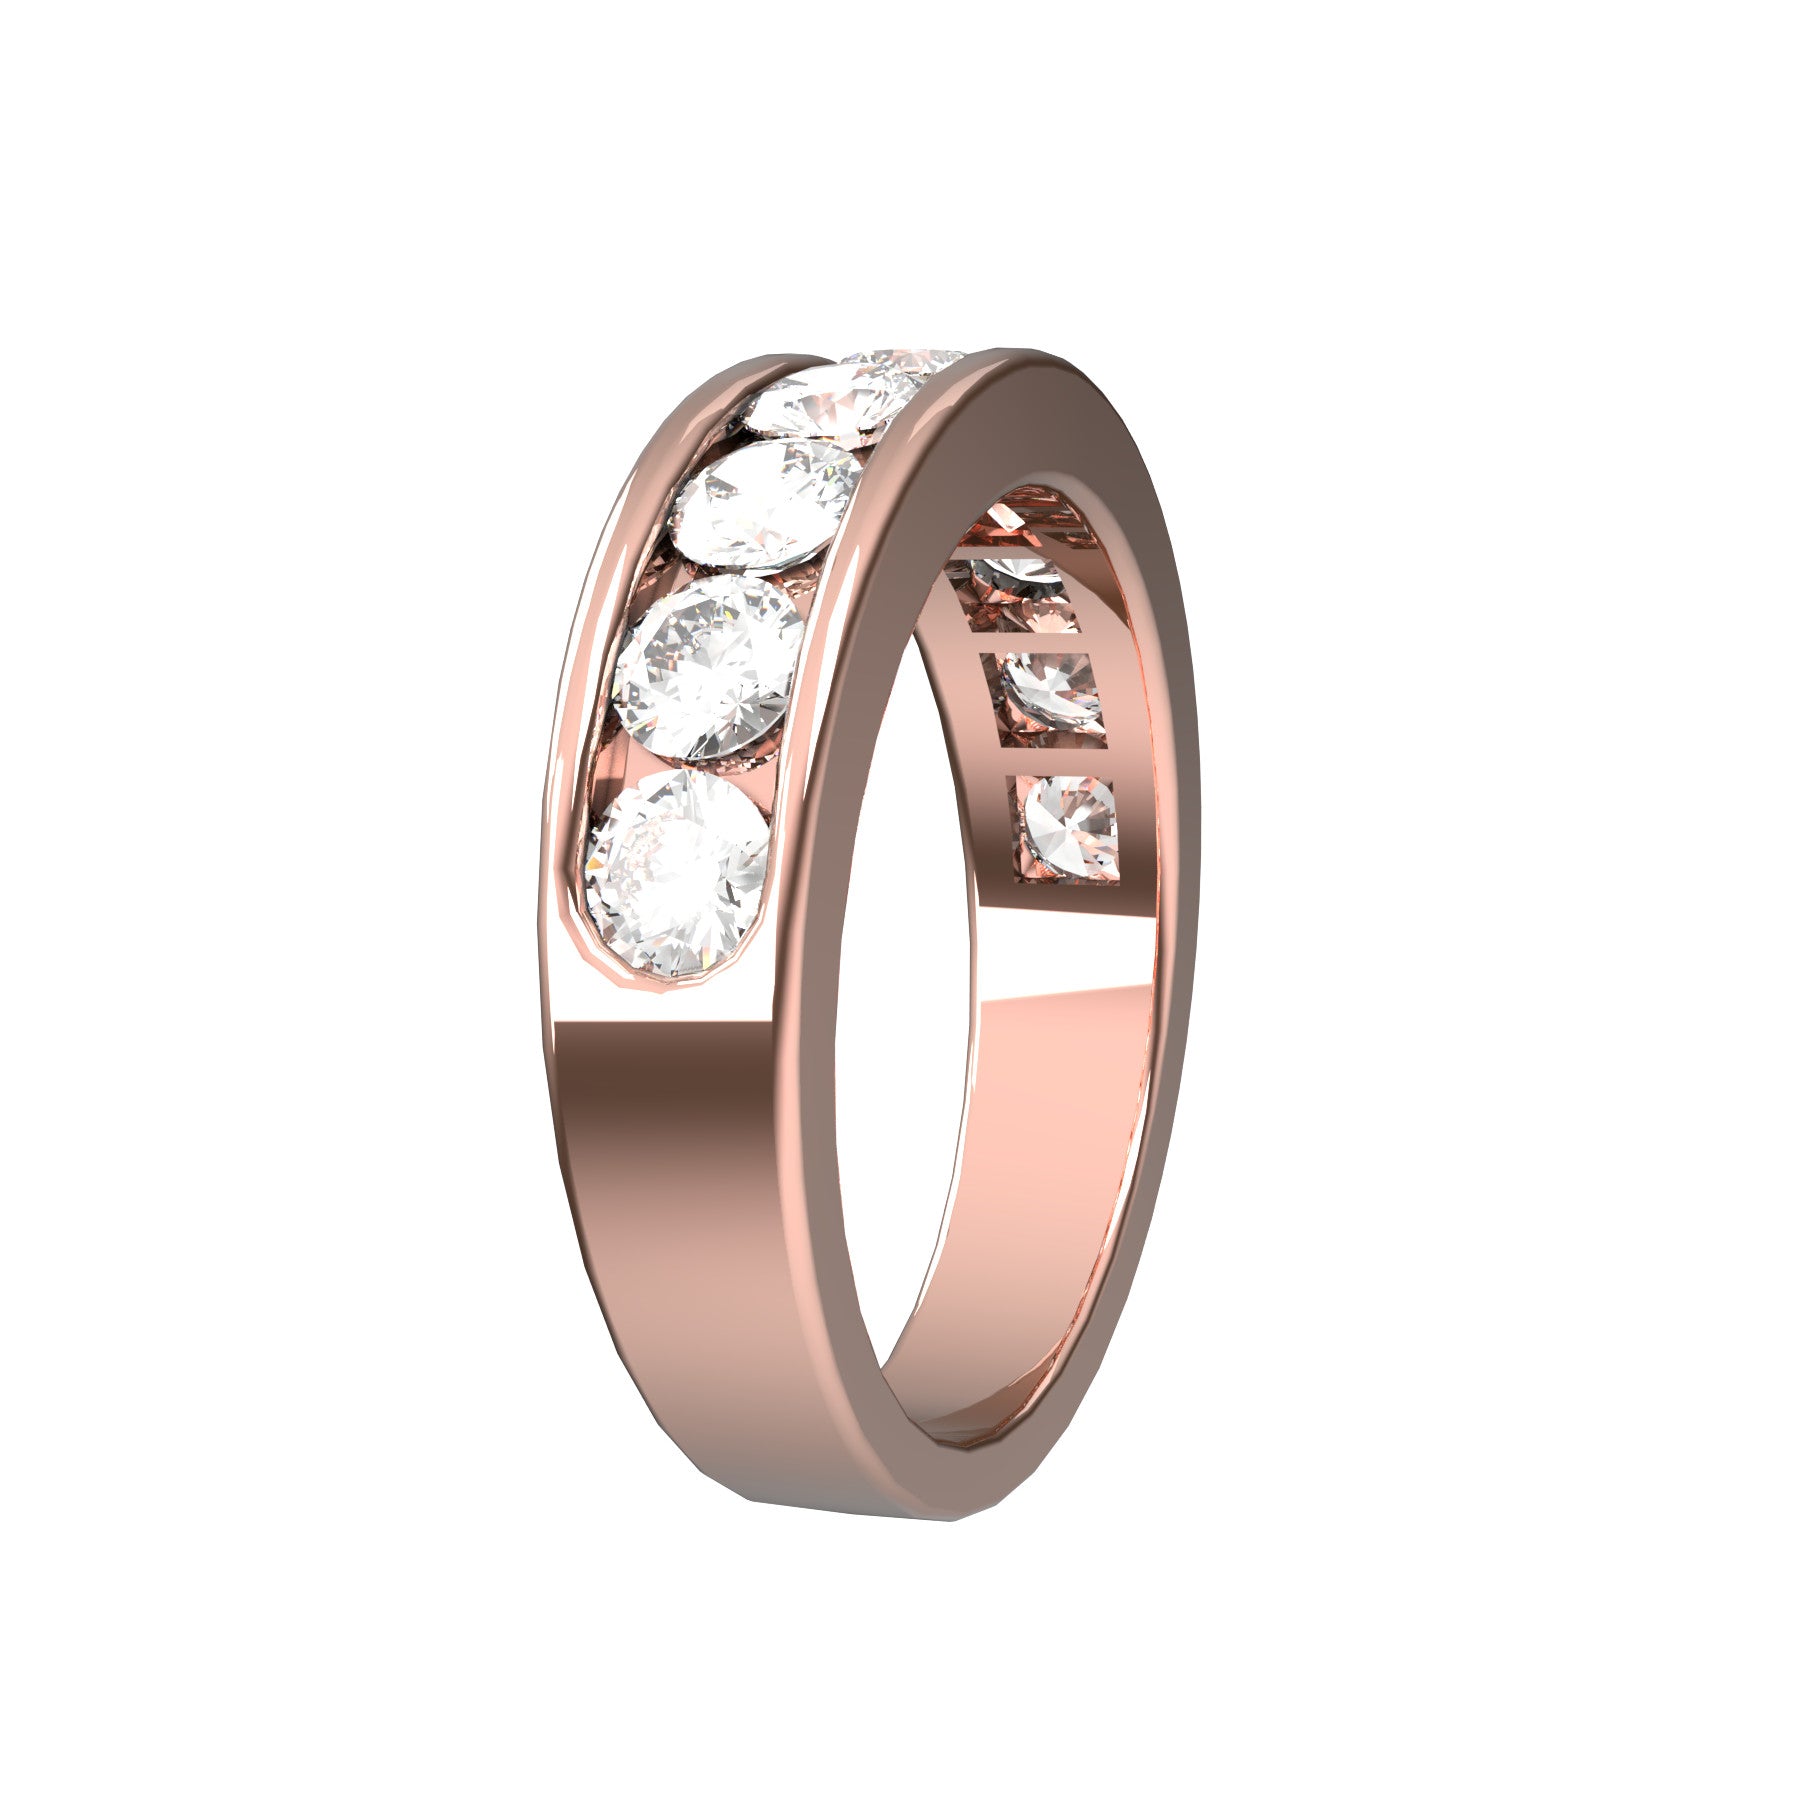 perpetual half wedding ring , 18 K pink gold, 0,13 ct round natural diamond, weight about 5,6 g. (0.20 oz), width 5,40 mm